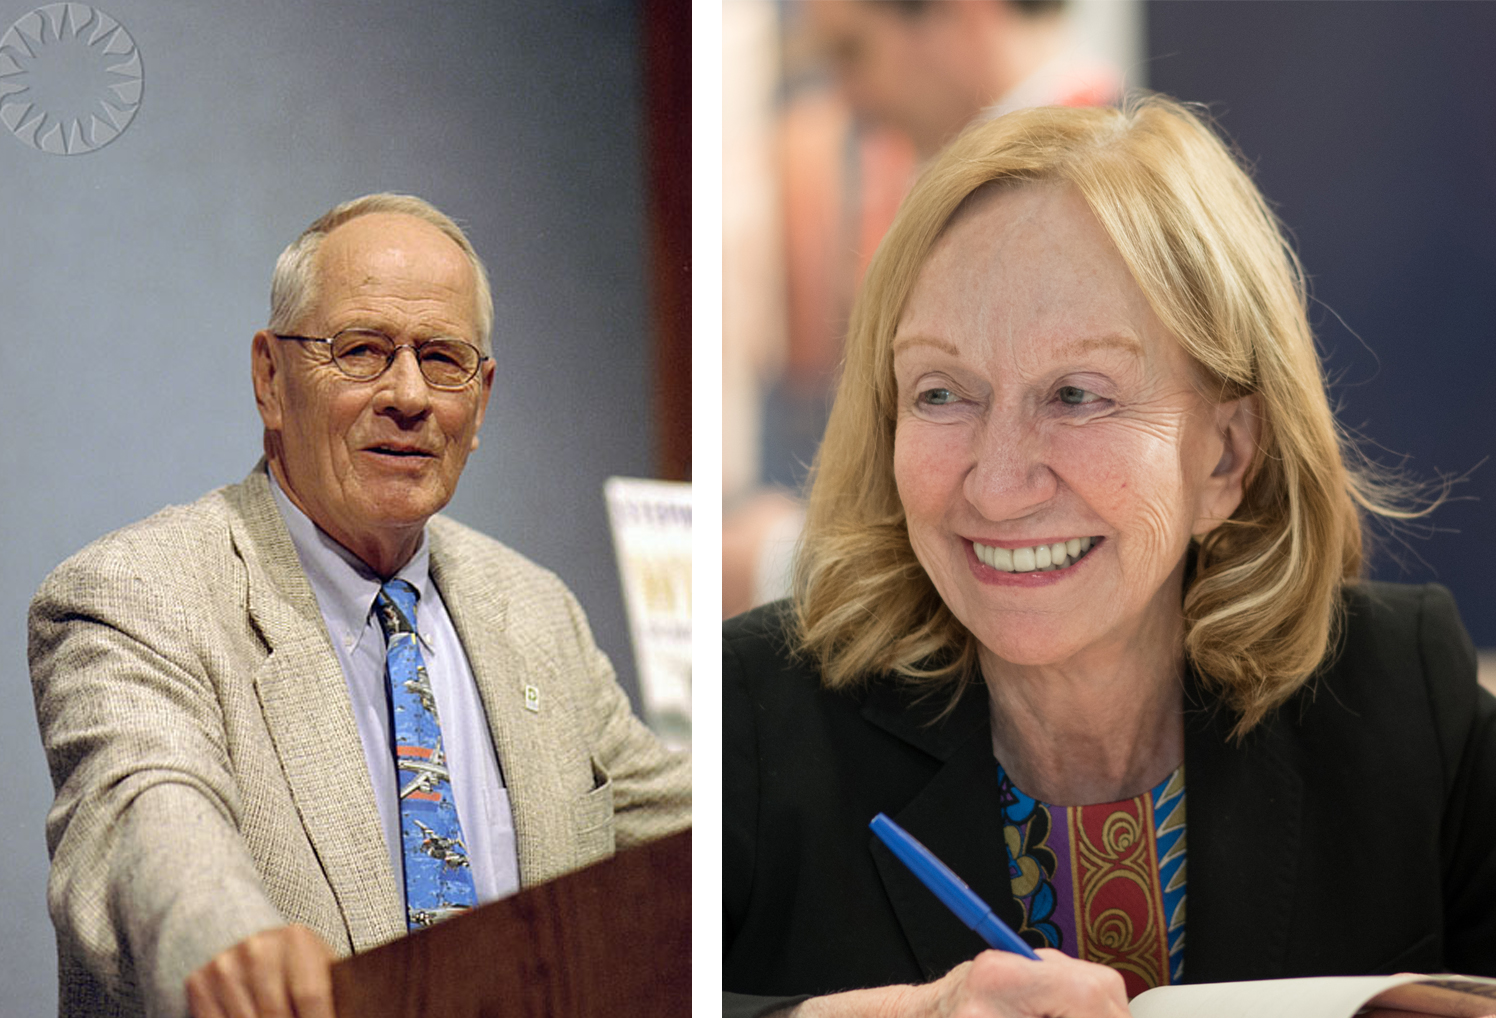 From left to right: Stephen E. Ambrose at a lectern; Doris Kearns Goodwin holding a pen and smiling.